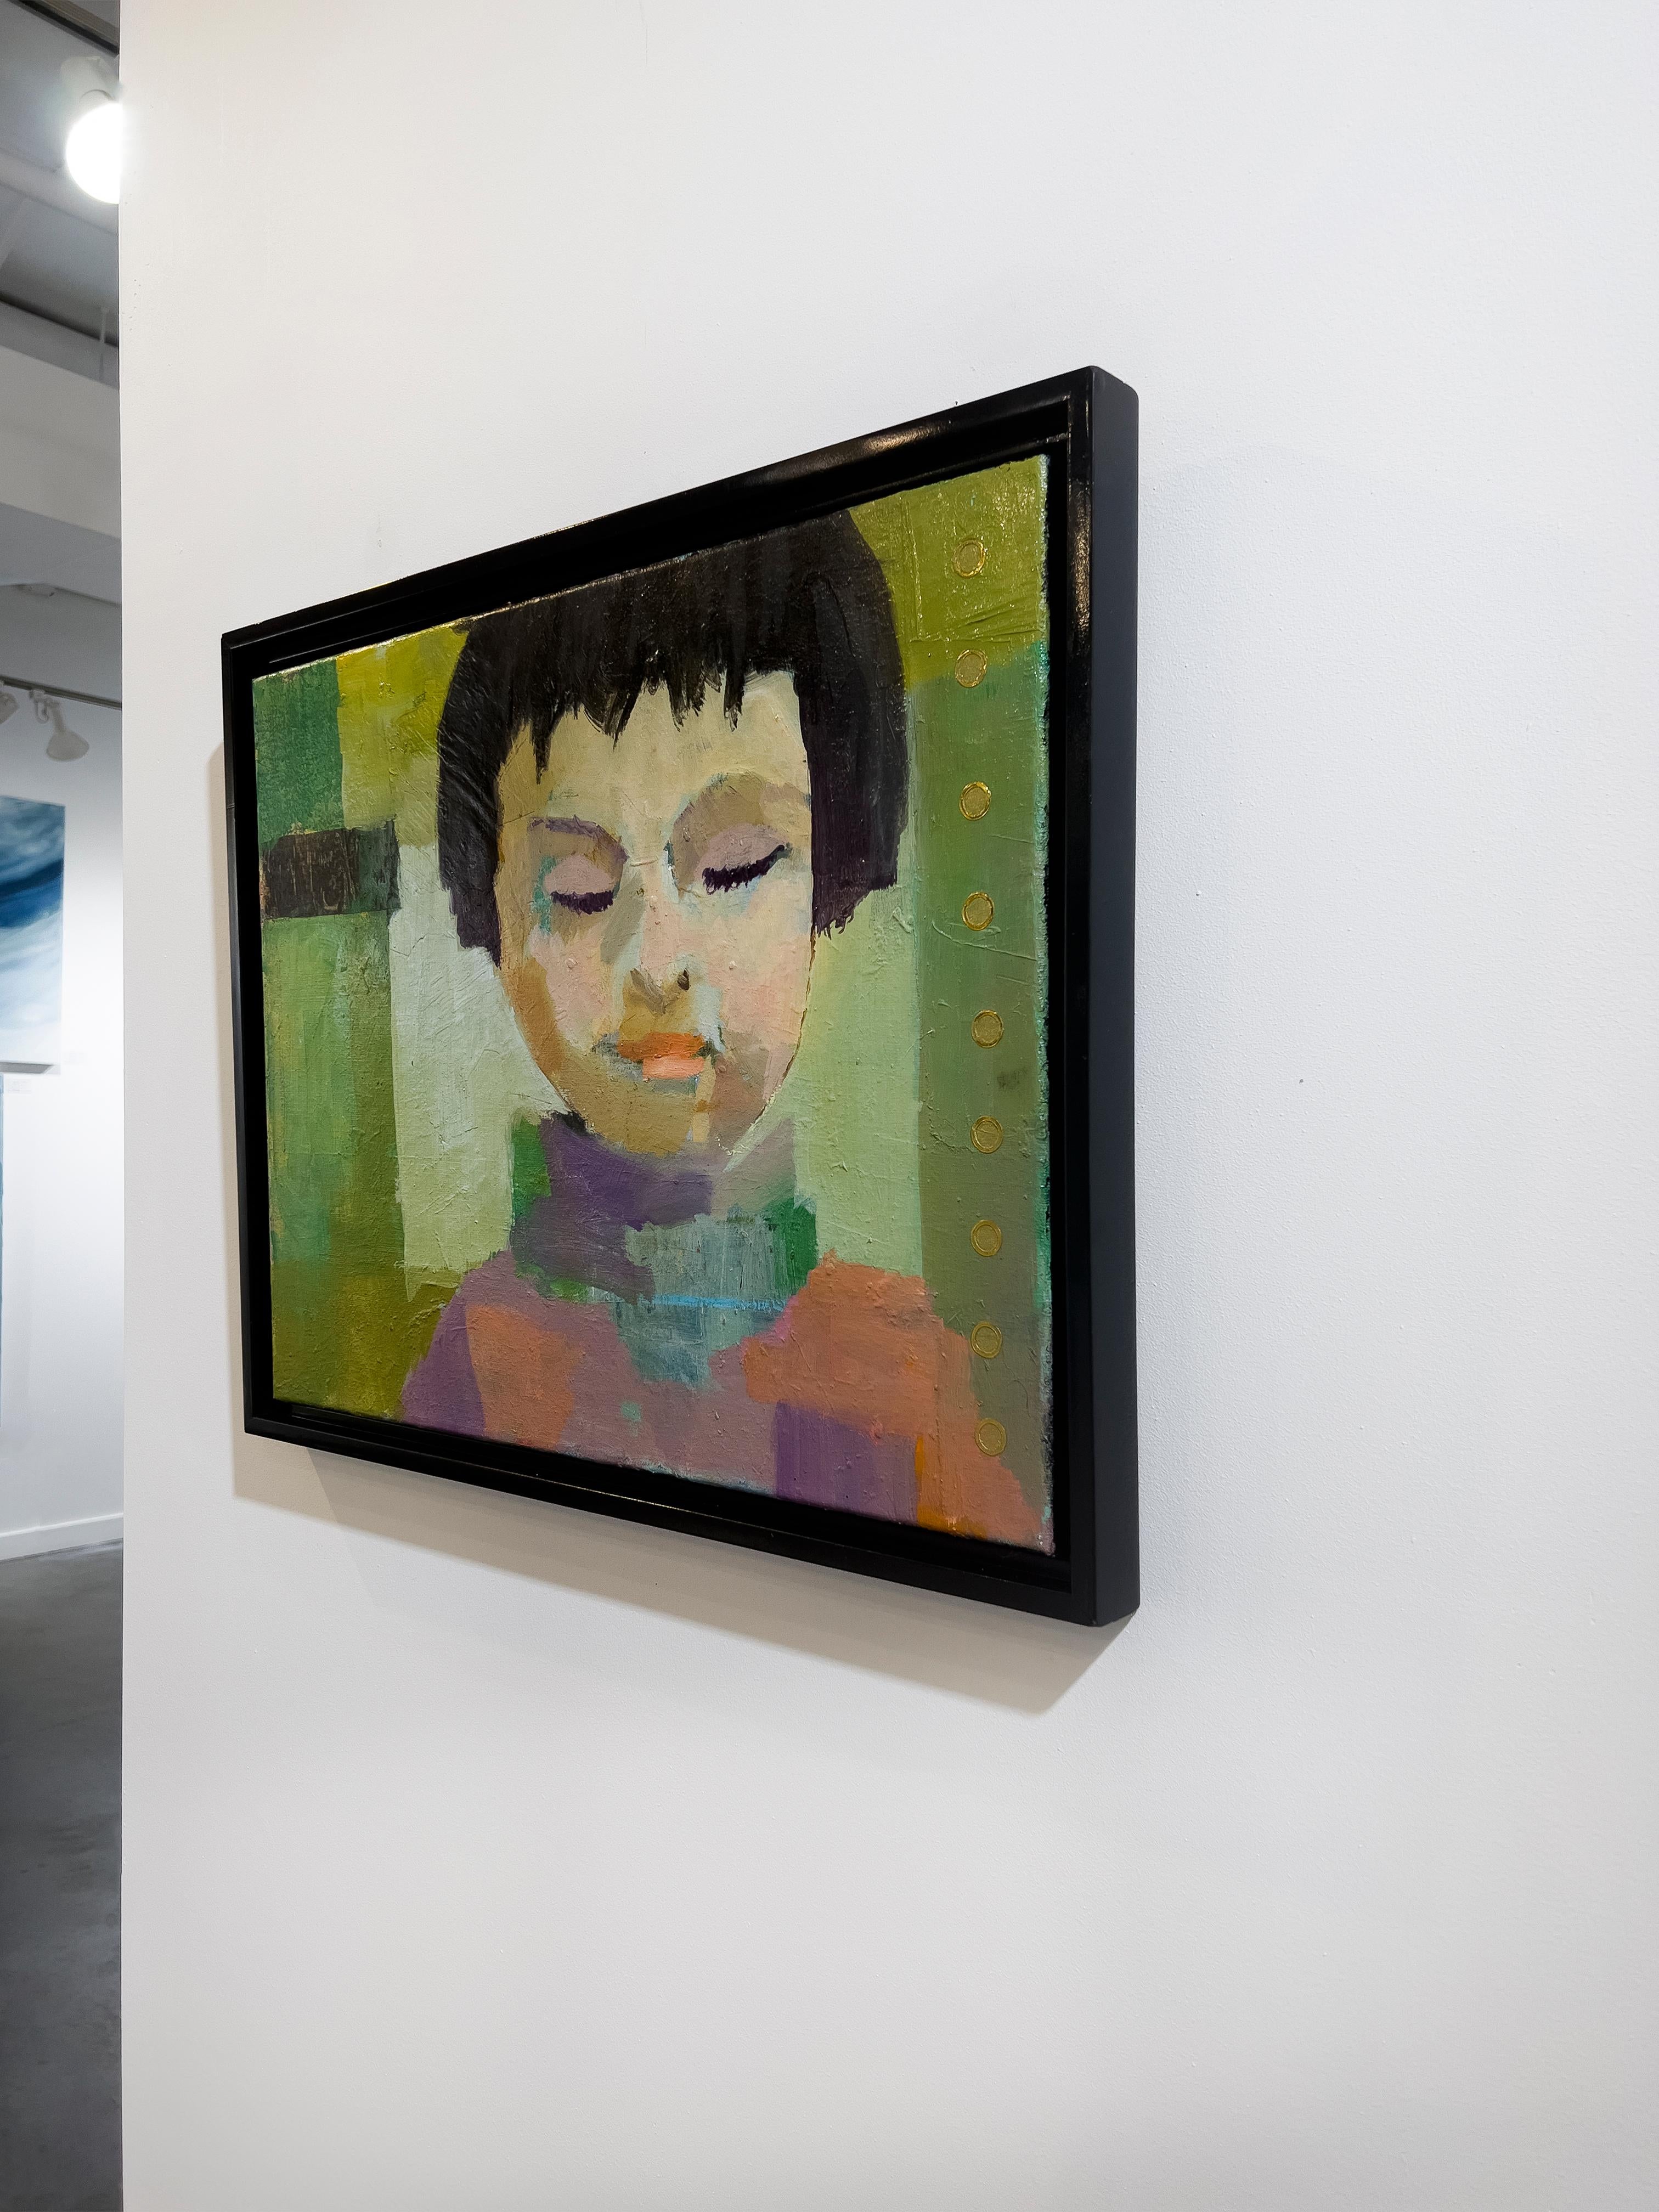 This abstract portrait painting by Christine Averill-Green is made with oil paint on canvas. It captures a child with dark hair, wearing a warm purple and pink sweater in front of an abstracted green and gold background. The painting itself is 16